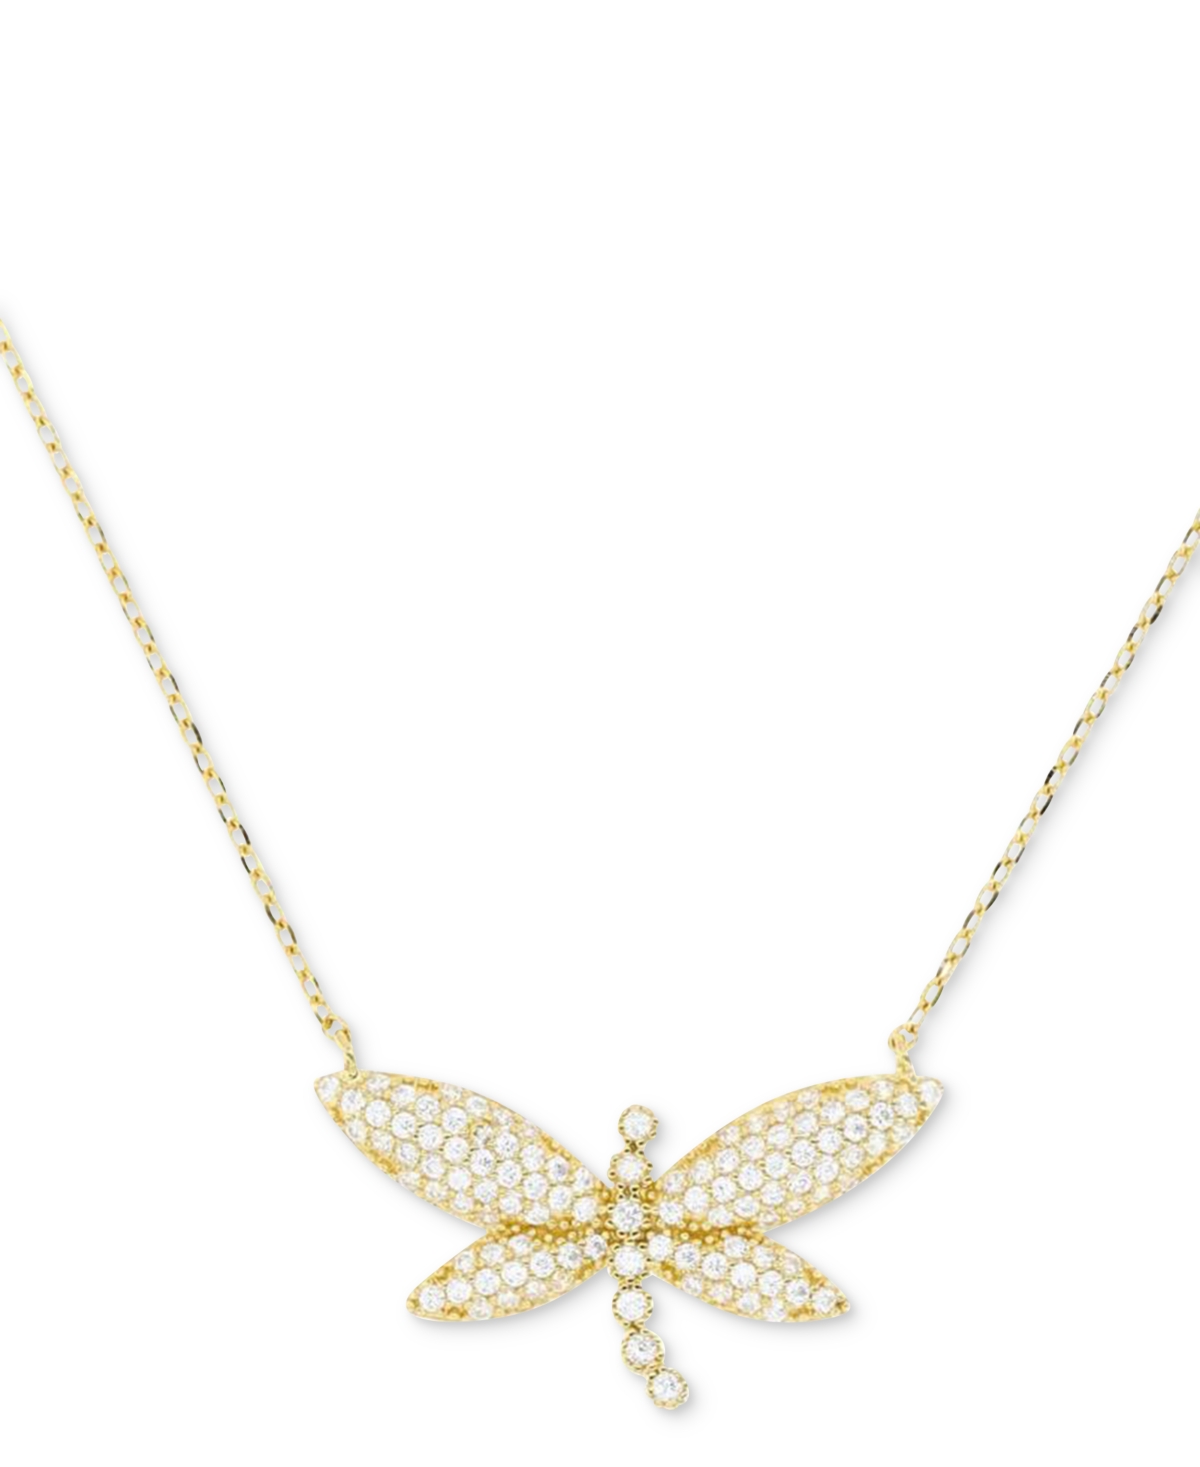 Macy's Cubic Zirconia Pave Dragonfly Pendant Necklace In 14k Gold-plated Sterling Silver, 18" +2" Extender